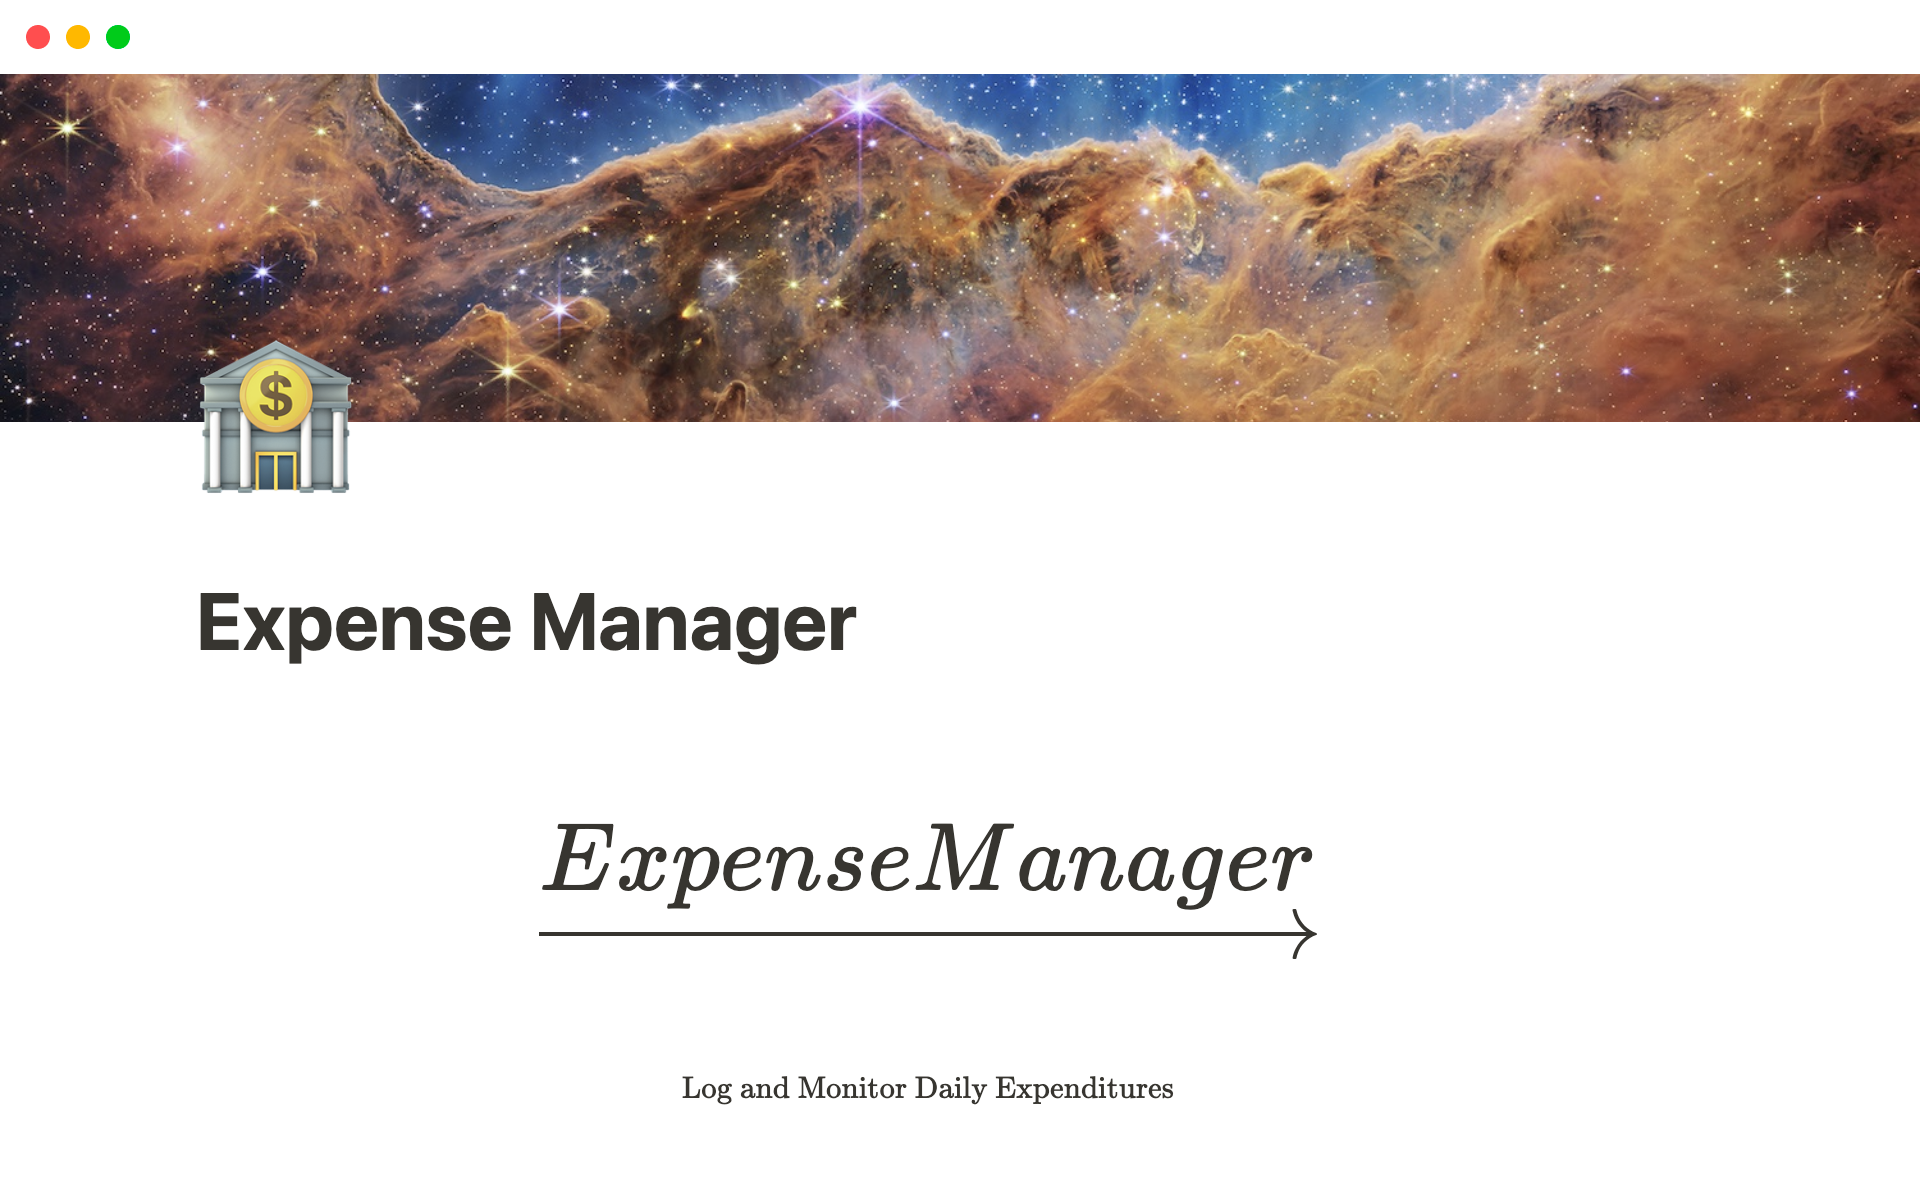 Log and Monitor Daily Expenditures